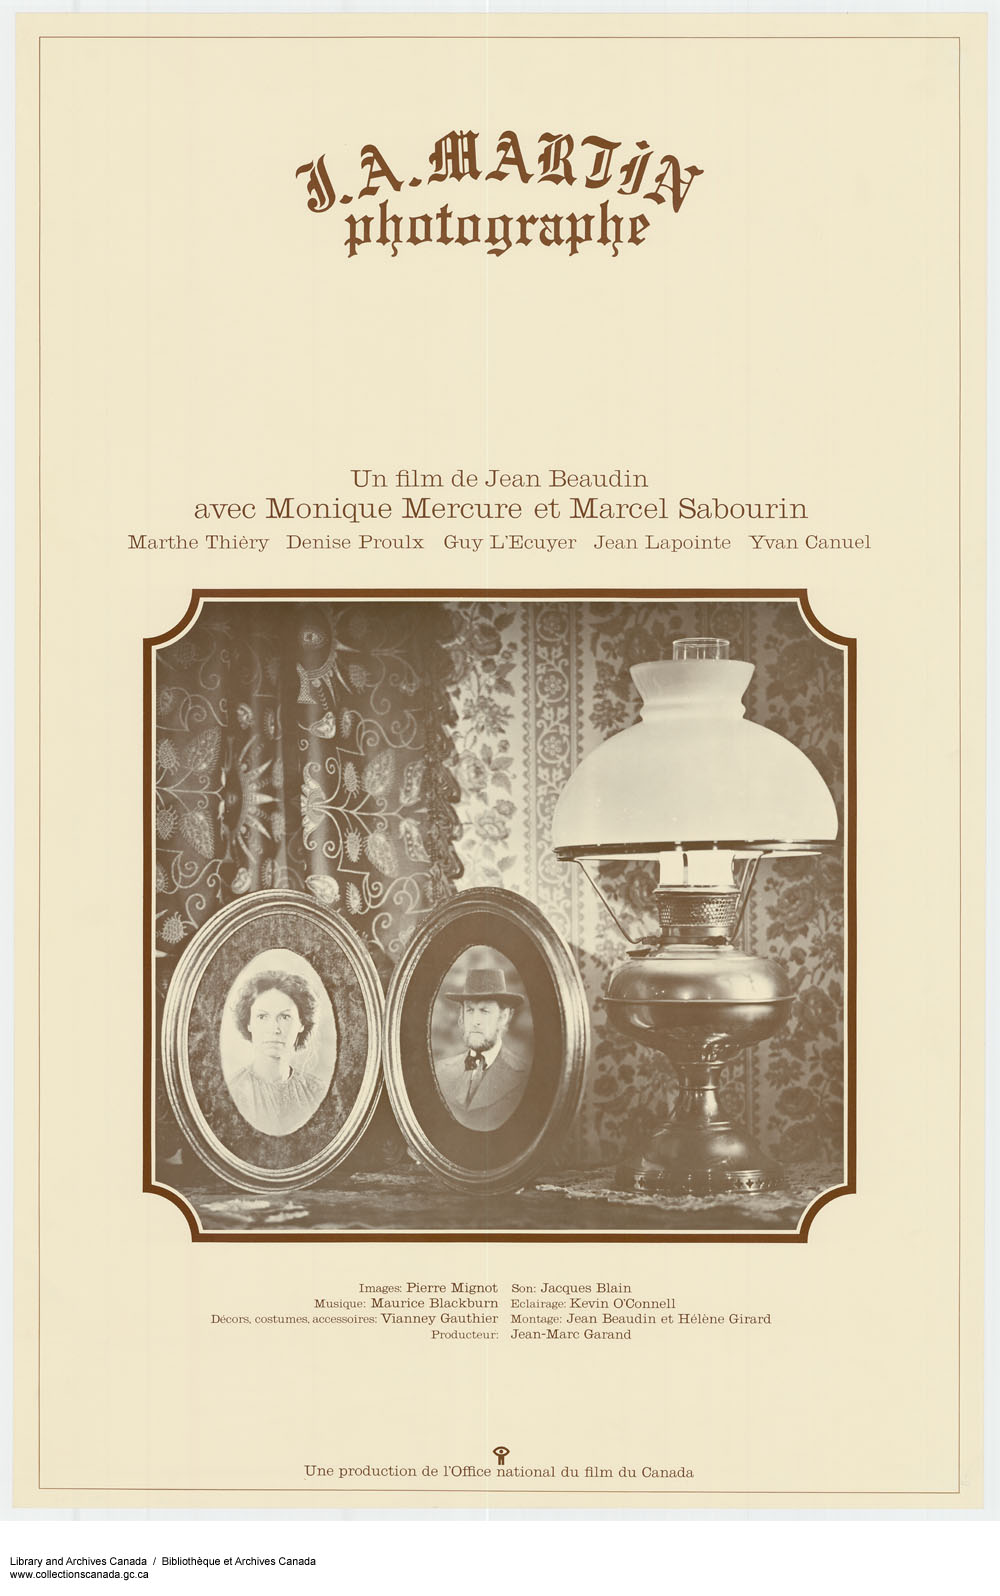 Poster of feature film showing two framed photographs, one a man, one a woman, on a table next to a lamp